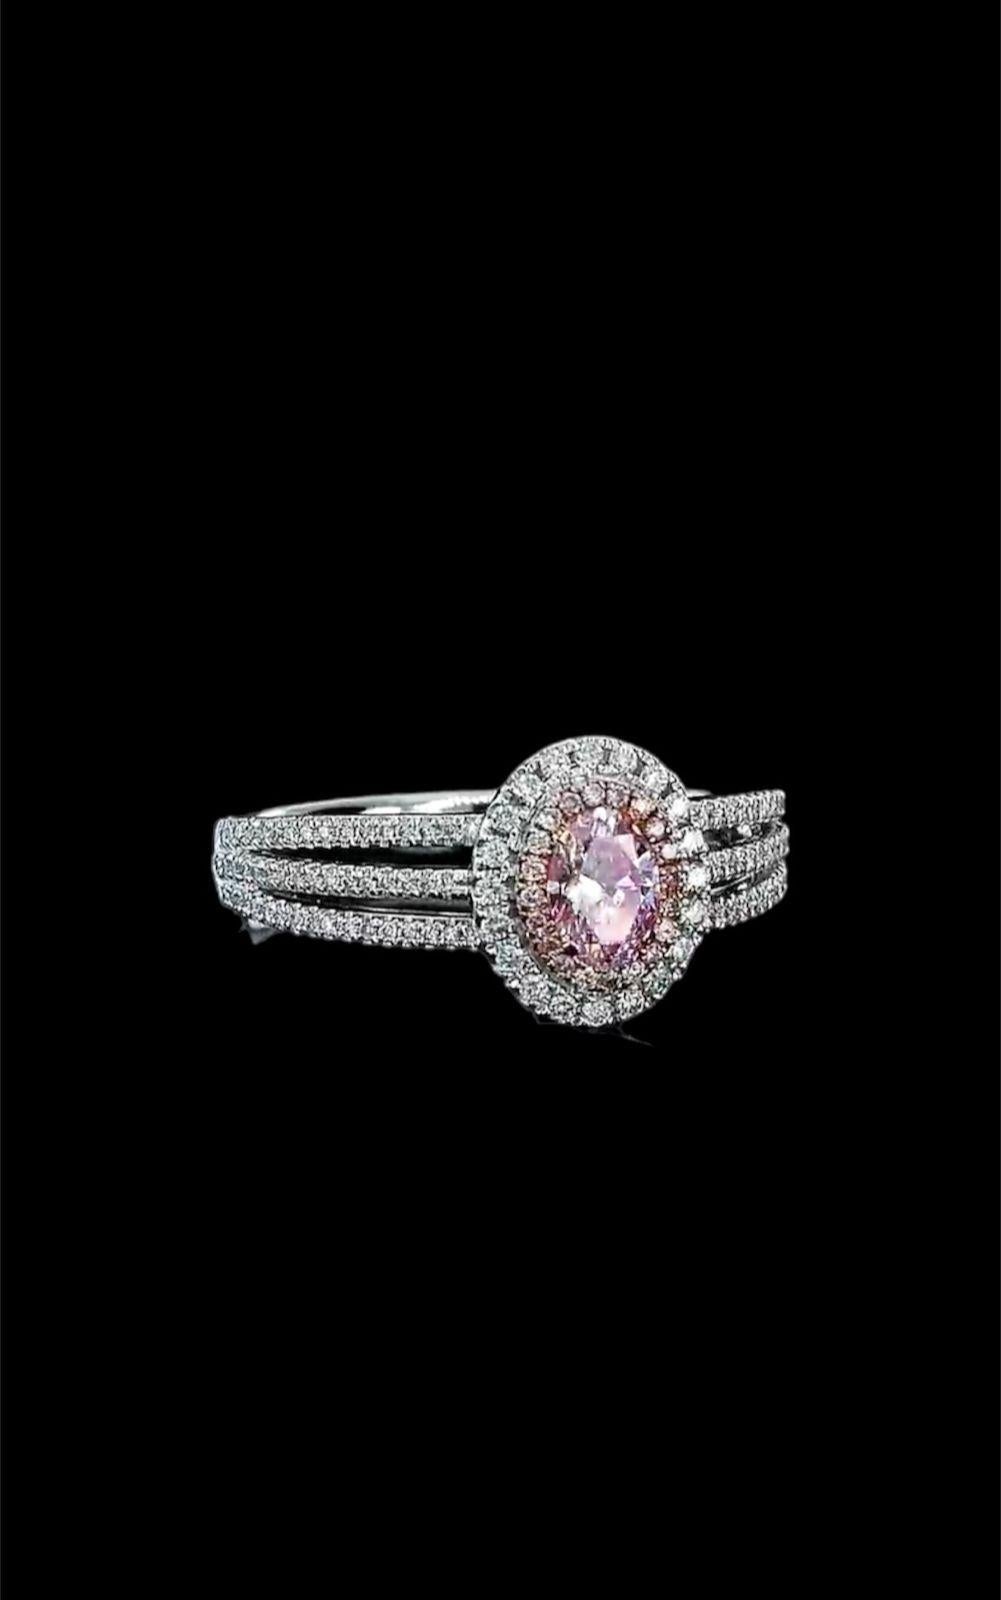 Oval Cut GIA Certified 0.33 Carat Faint Pink Diamond Ring VS2 Clarity For Sale